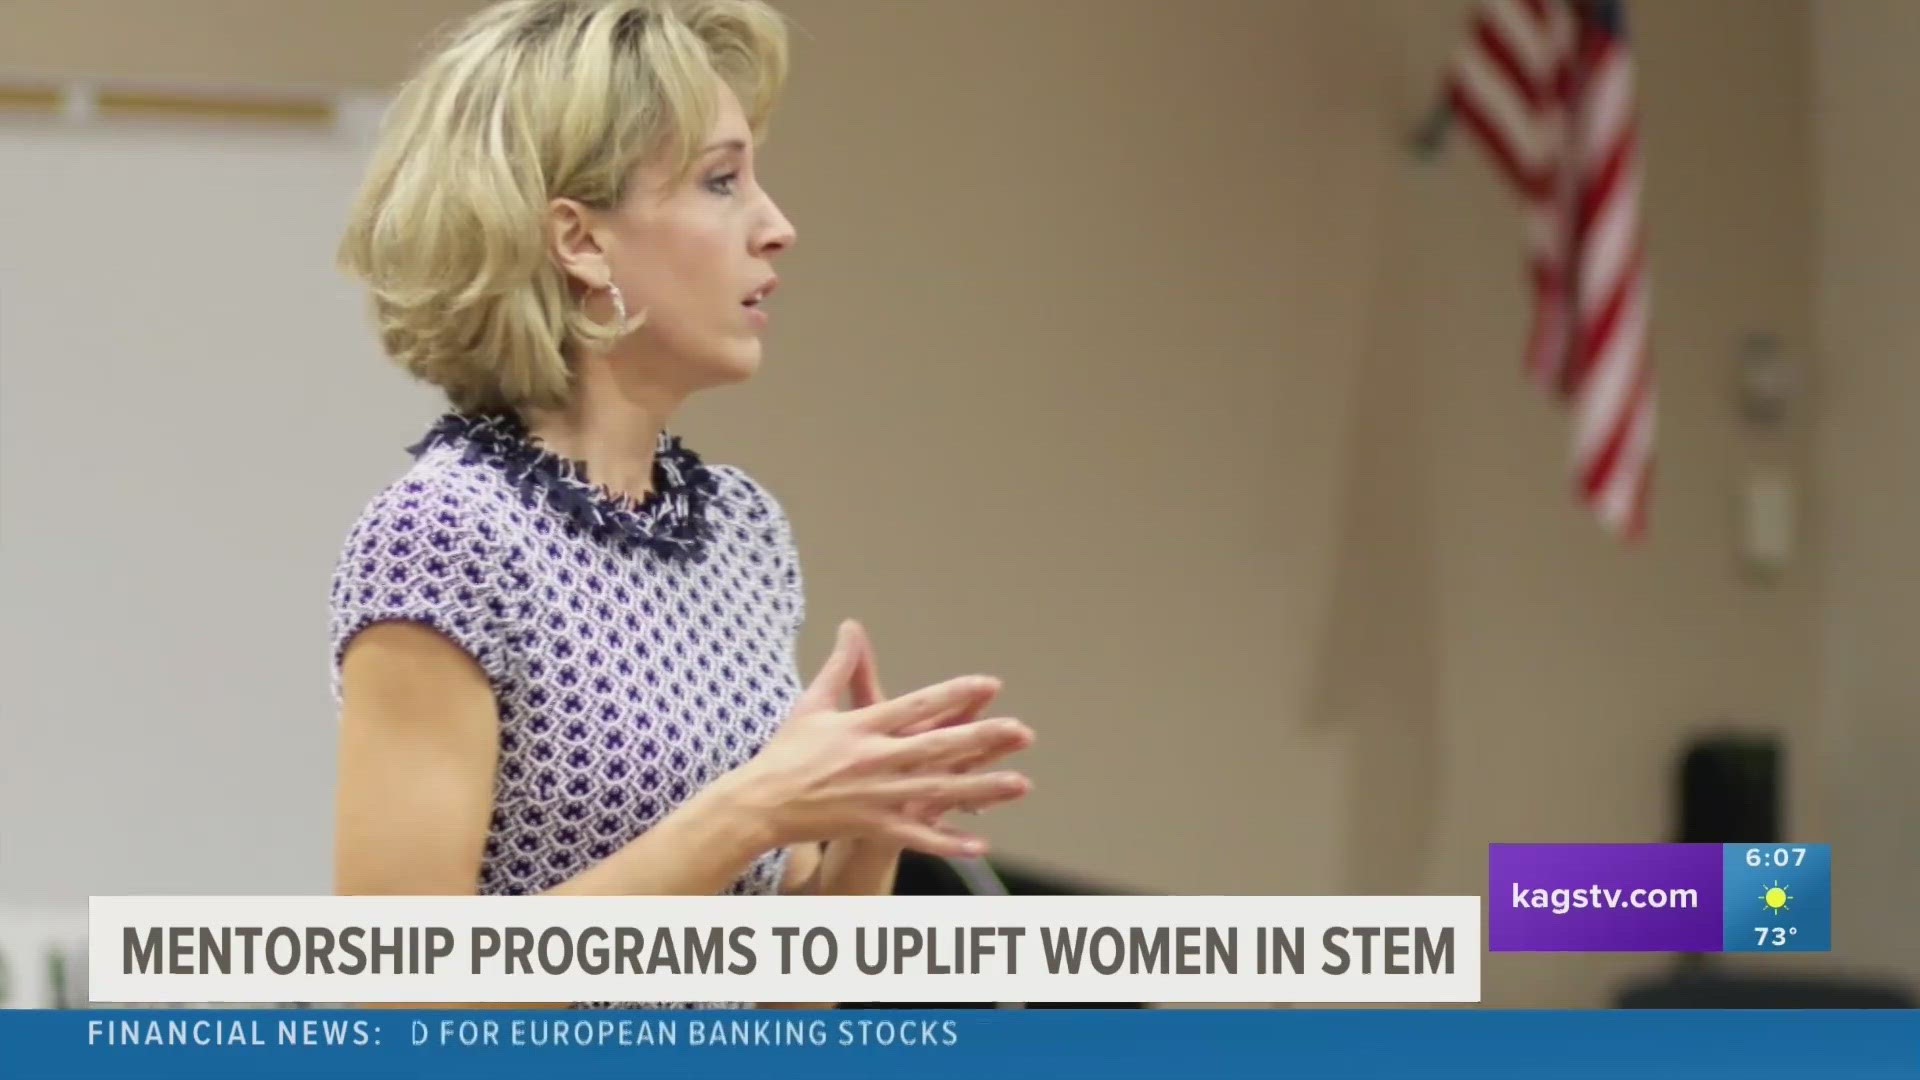 Monica Eaton, a business leader in the tech world, is creating mentorship programs to provide more opportunities for women in STEM.